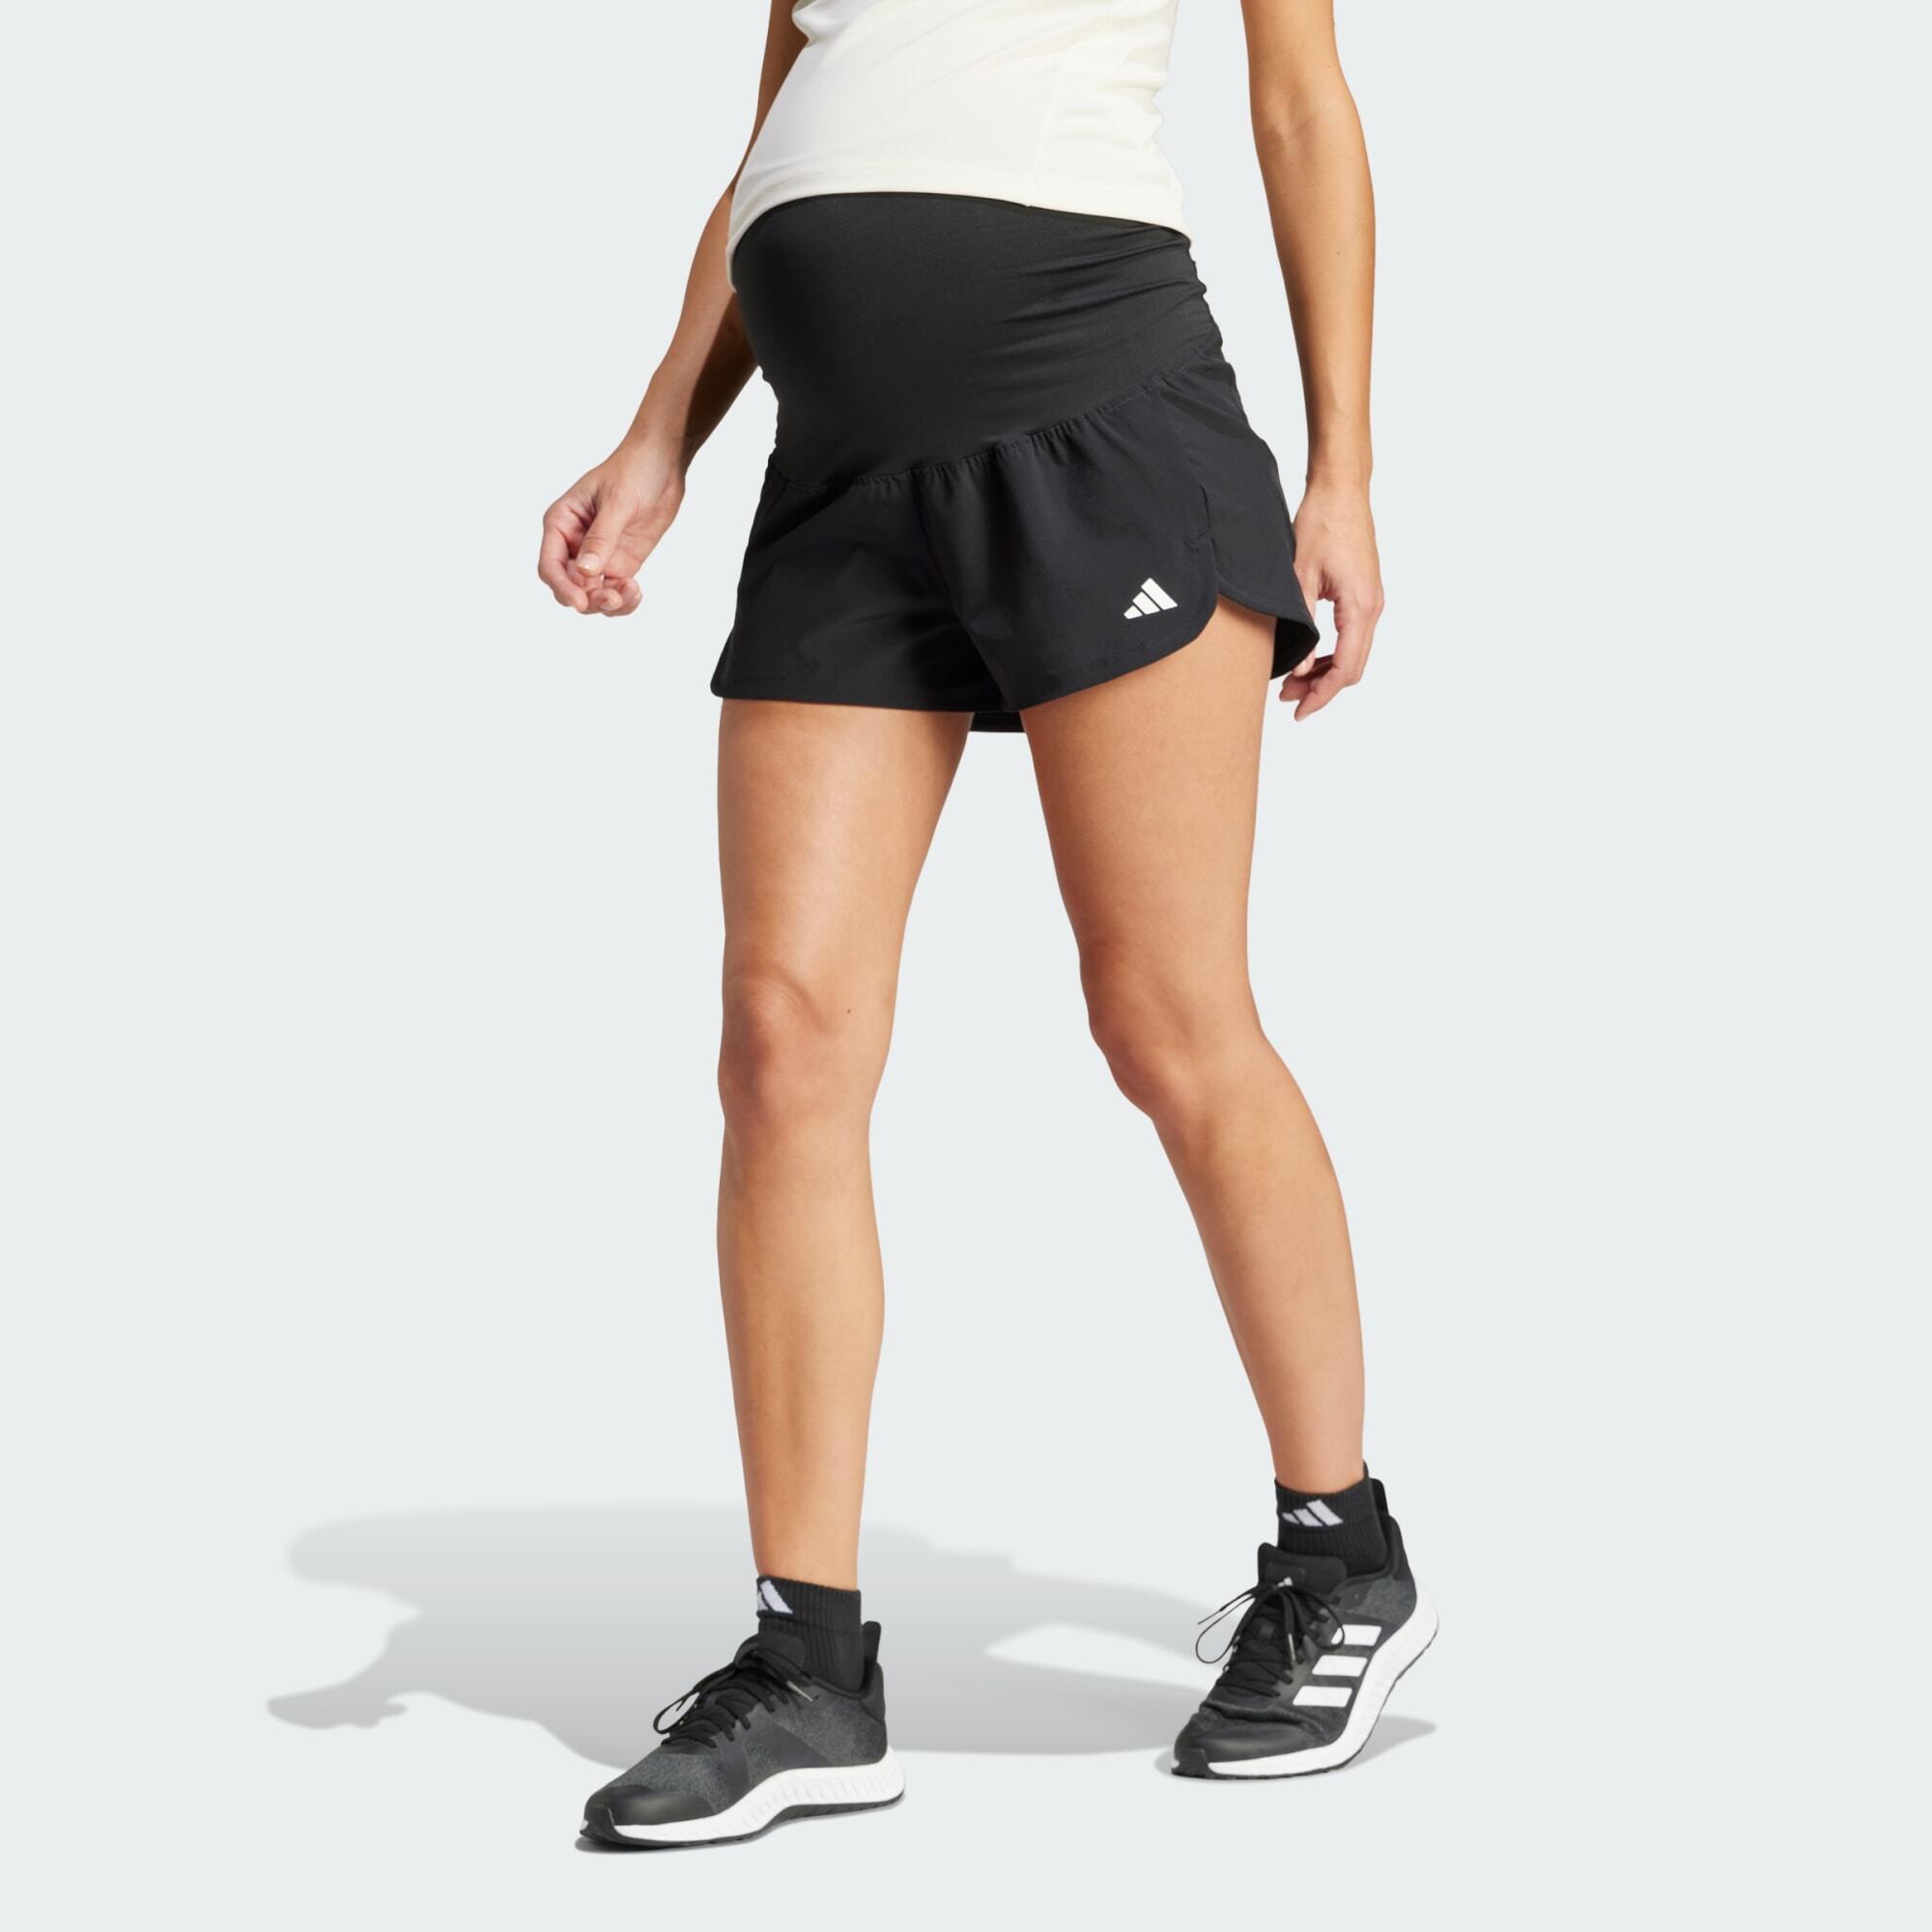 ADIDAS Pacer Woven Stretch Training Maternity Shorts